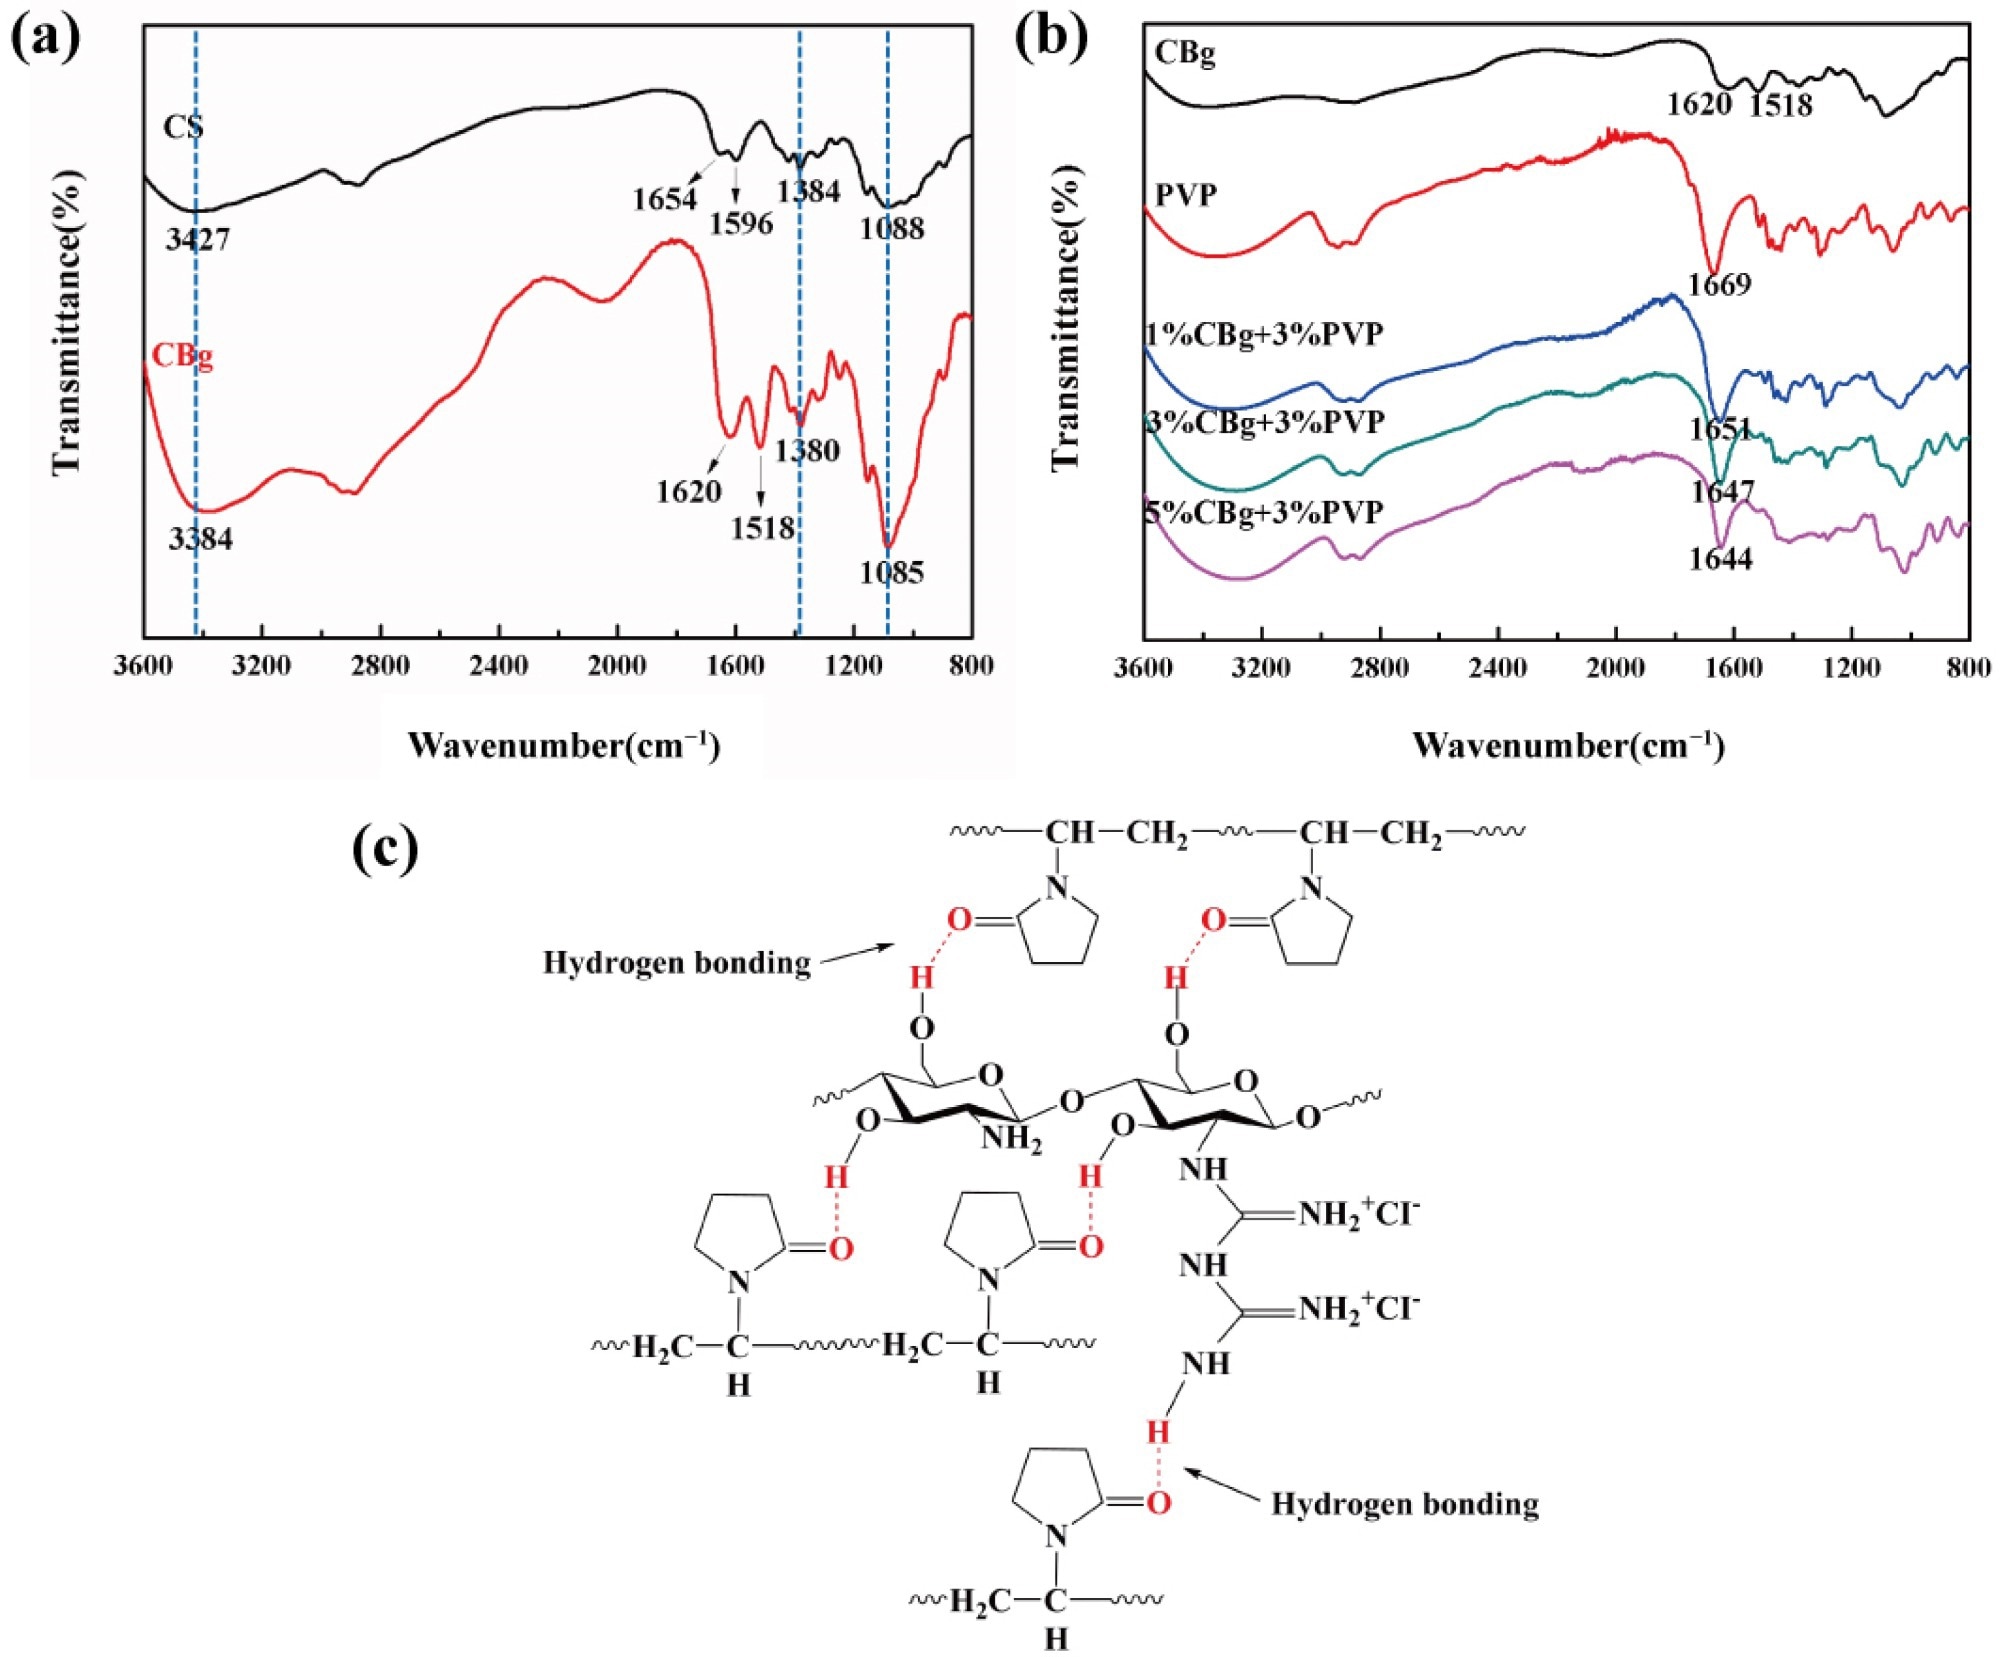 (a) FTIR spectra of CS and its derivative CBg. (b) FTIR spectra of CBg, PVP, and CBg/PVP films with different mass concentrations. (c) Schematic diagram of the interaction between CBg and PVP.